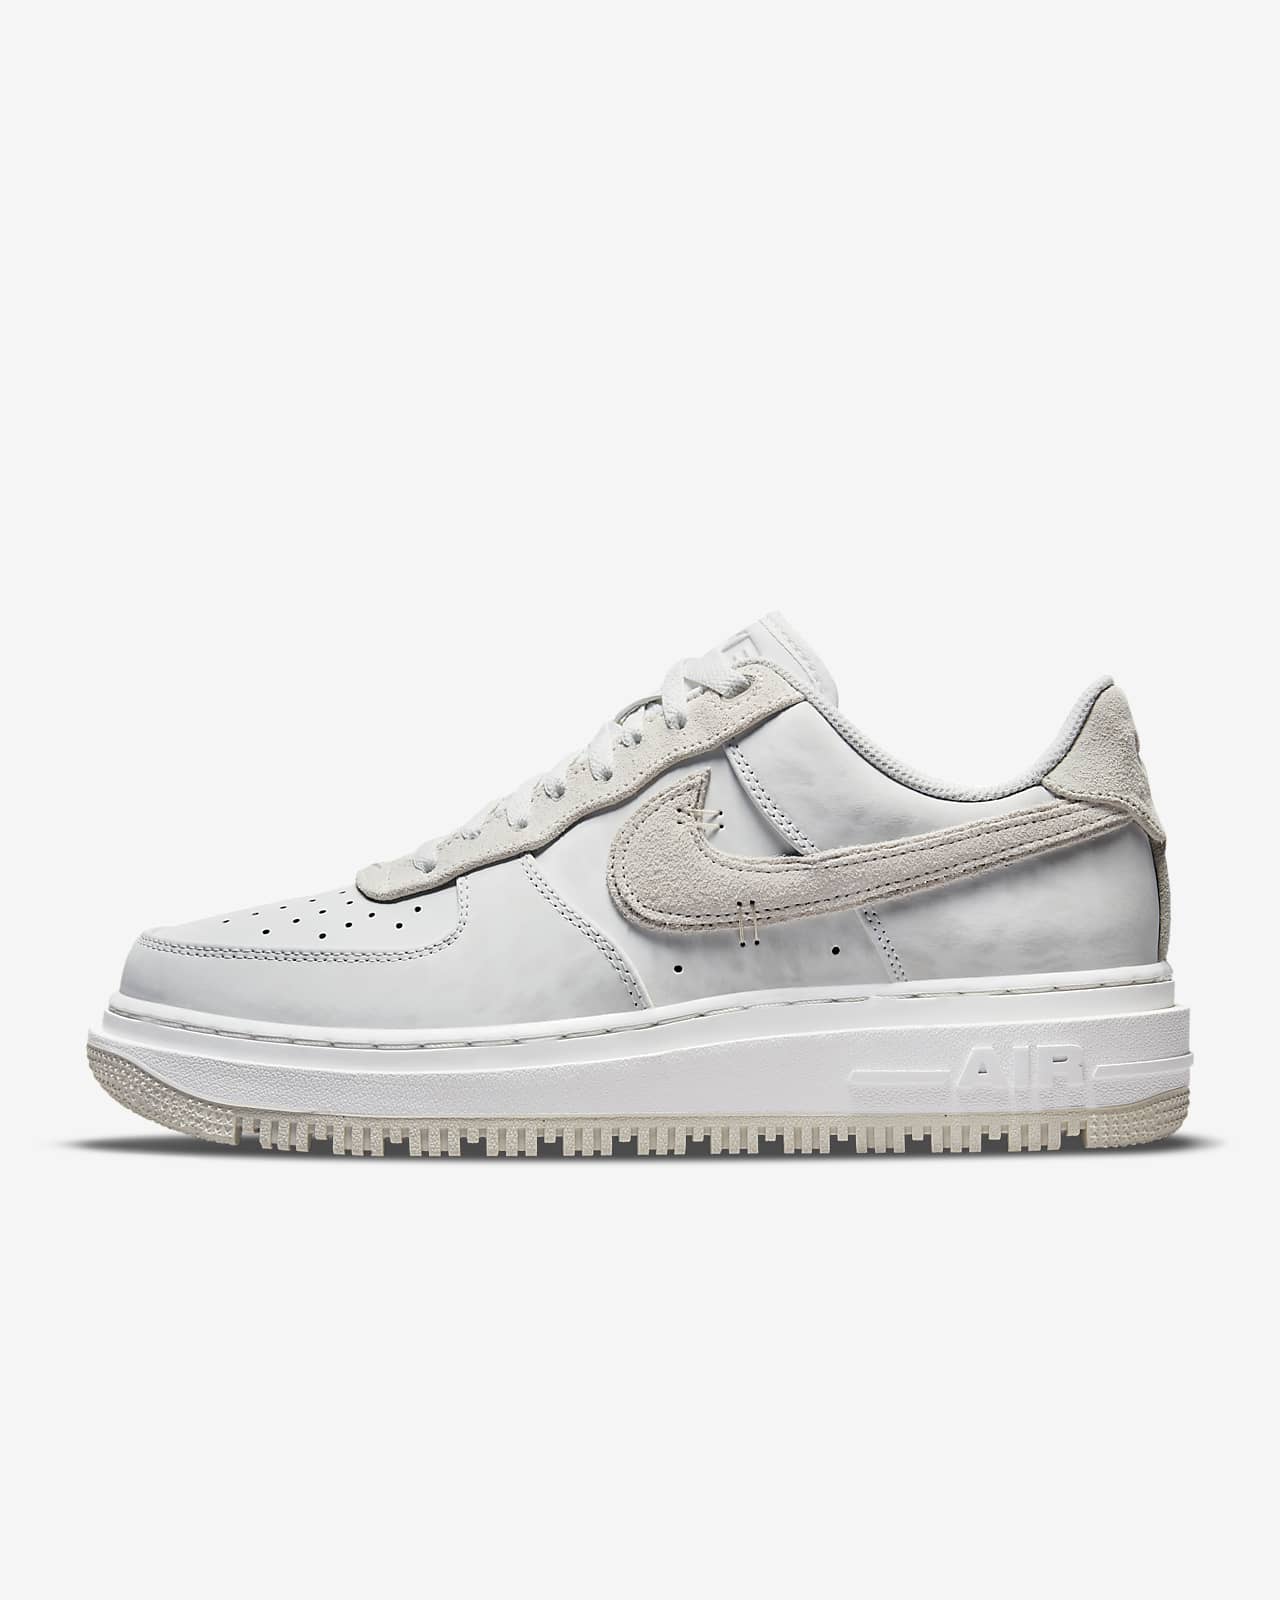 Cusco Specialiteit Ondeugd Nike Air Force 1 Luxe Men's Shoes. Nike.com